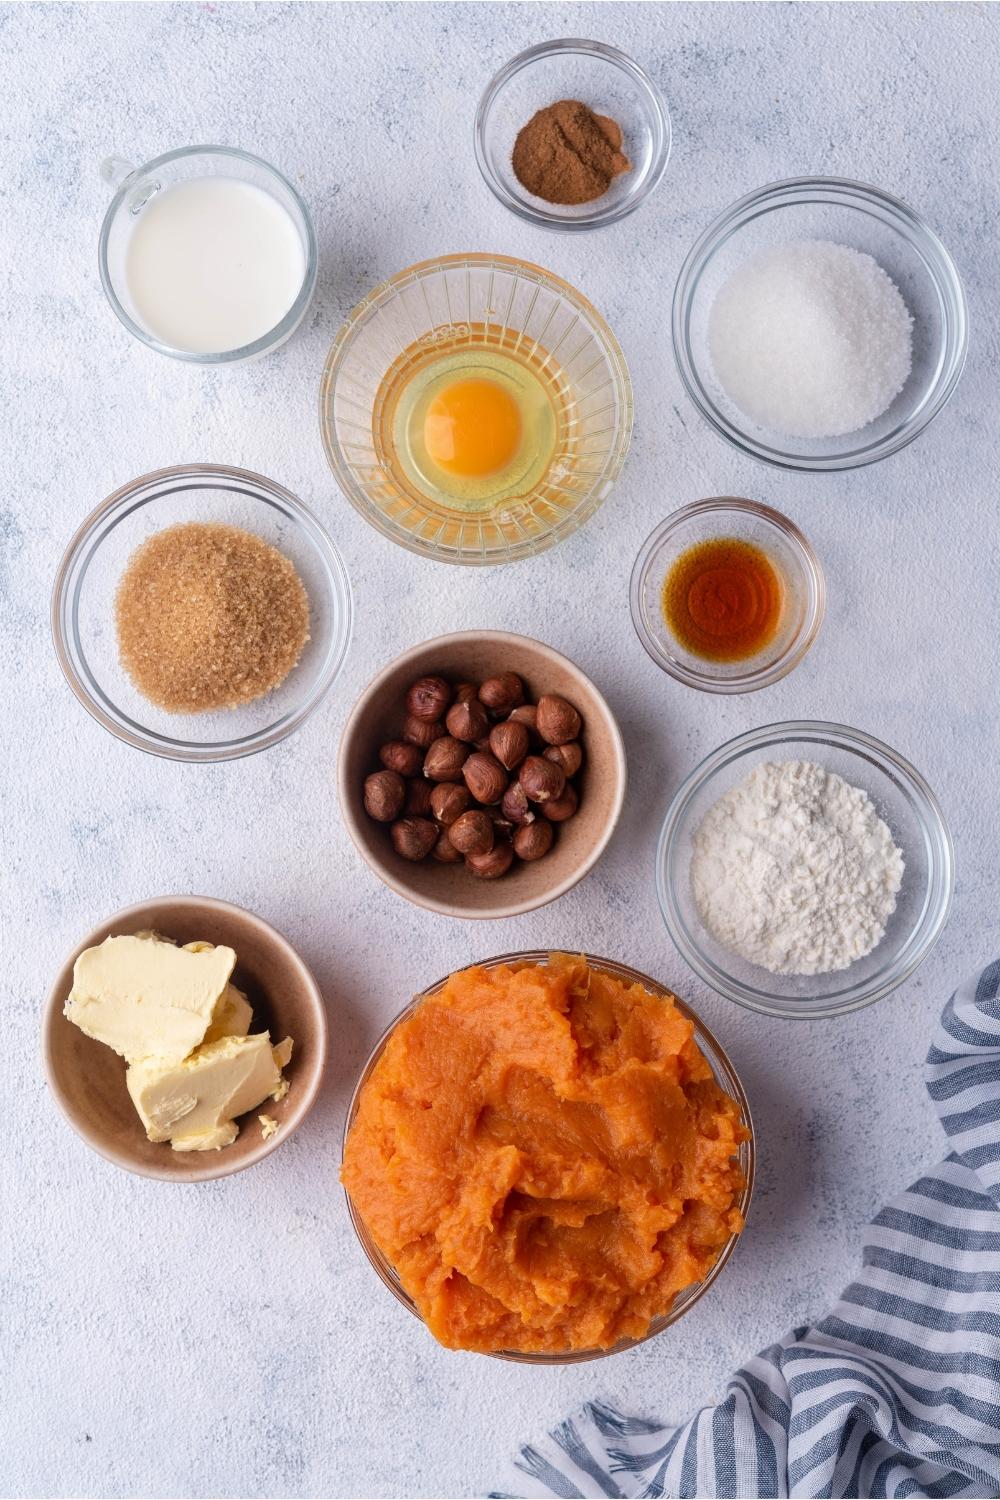 An assortment of ingredients for sweet potato souffle including bowls of sweet potato puree, butter, hazelnuts, egg, sugar, flour, and spices.